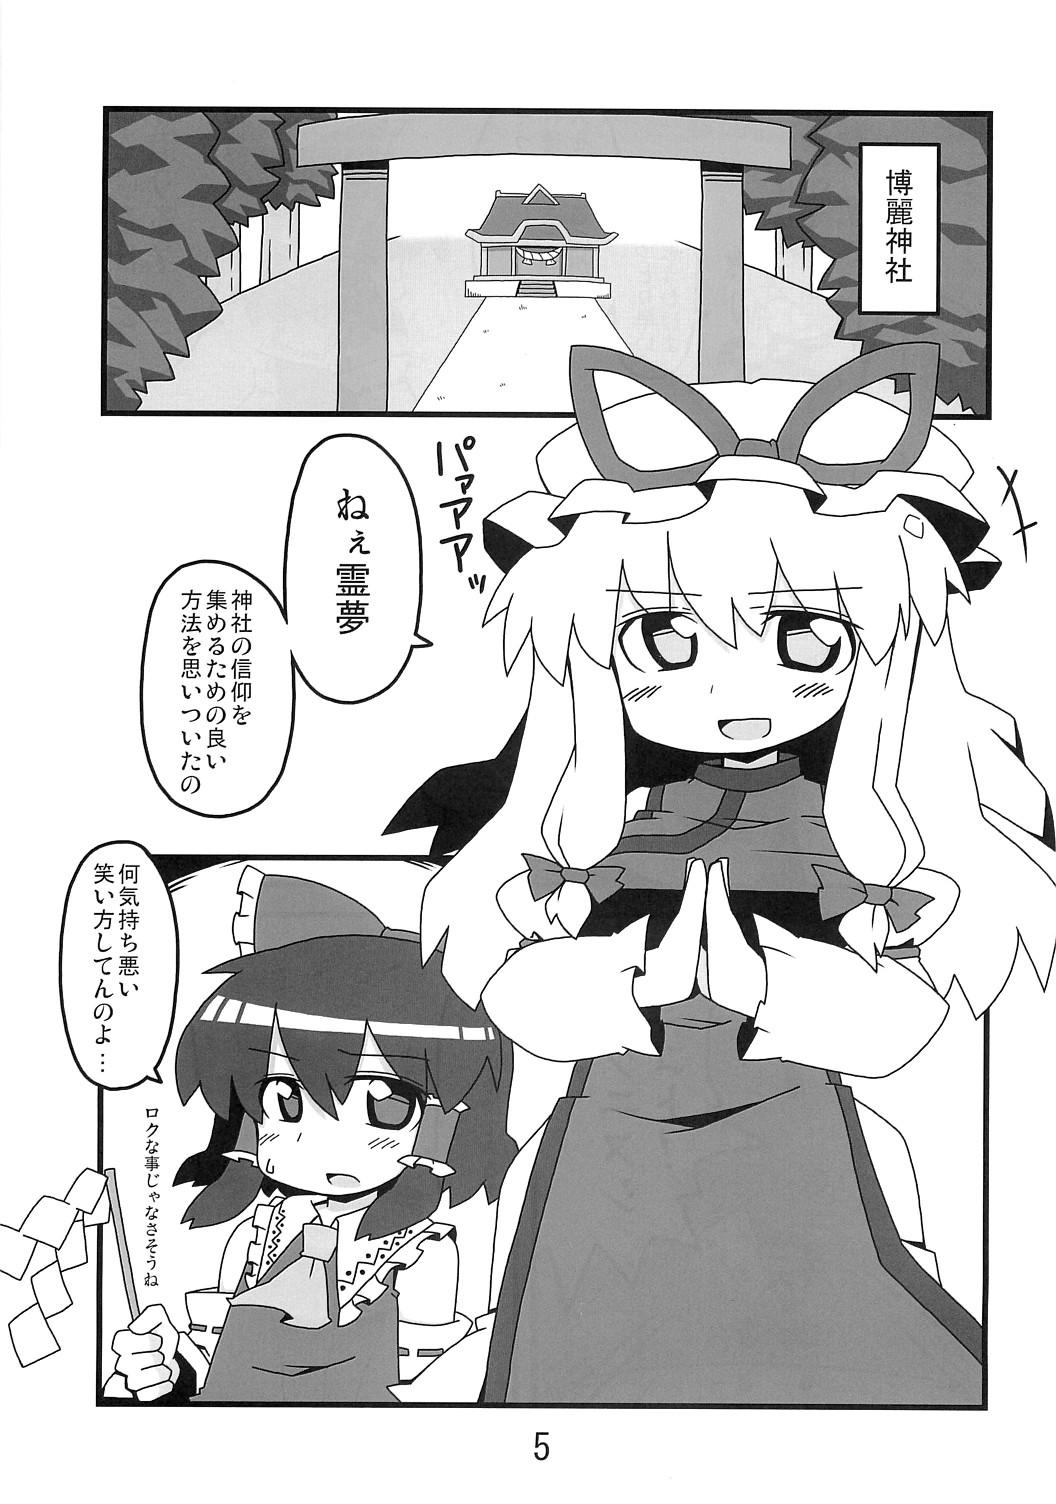 Affair 東方豊年祭 - Touhou project Titties - Page 4